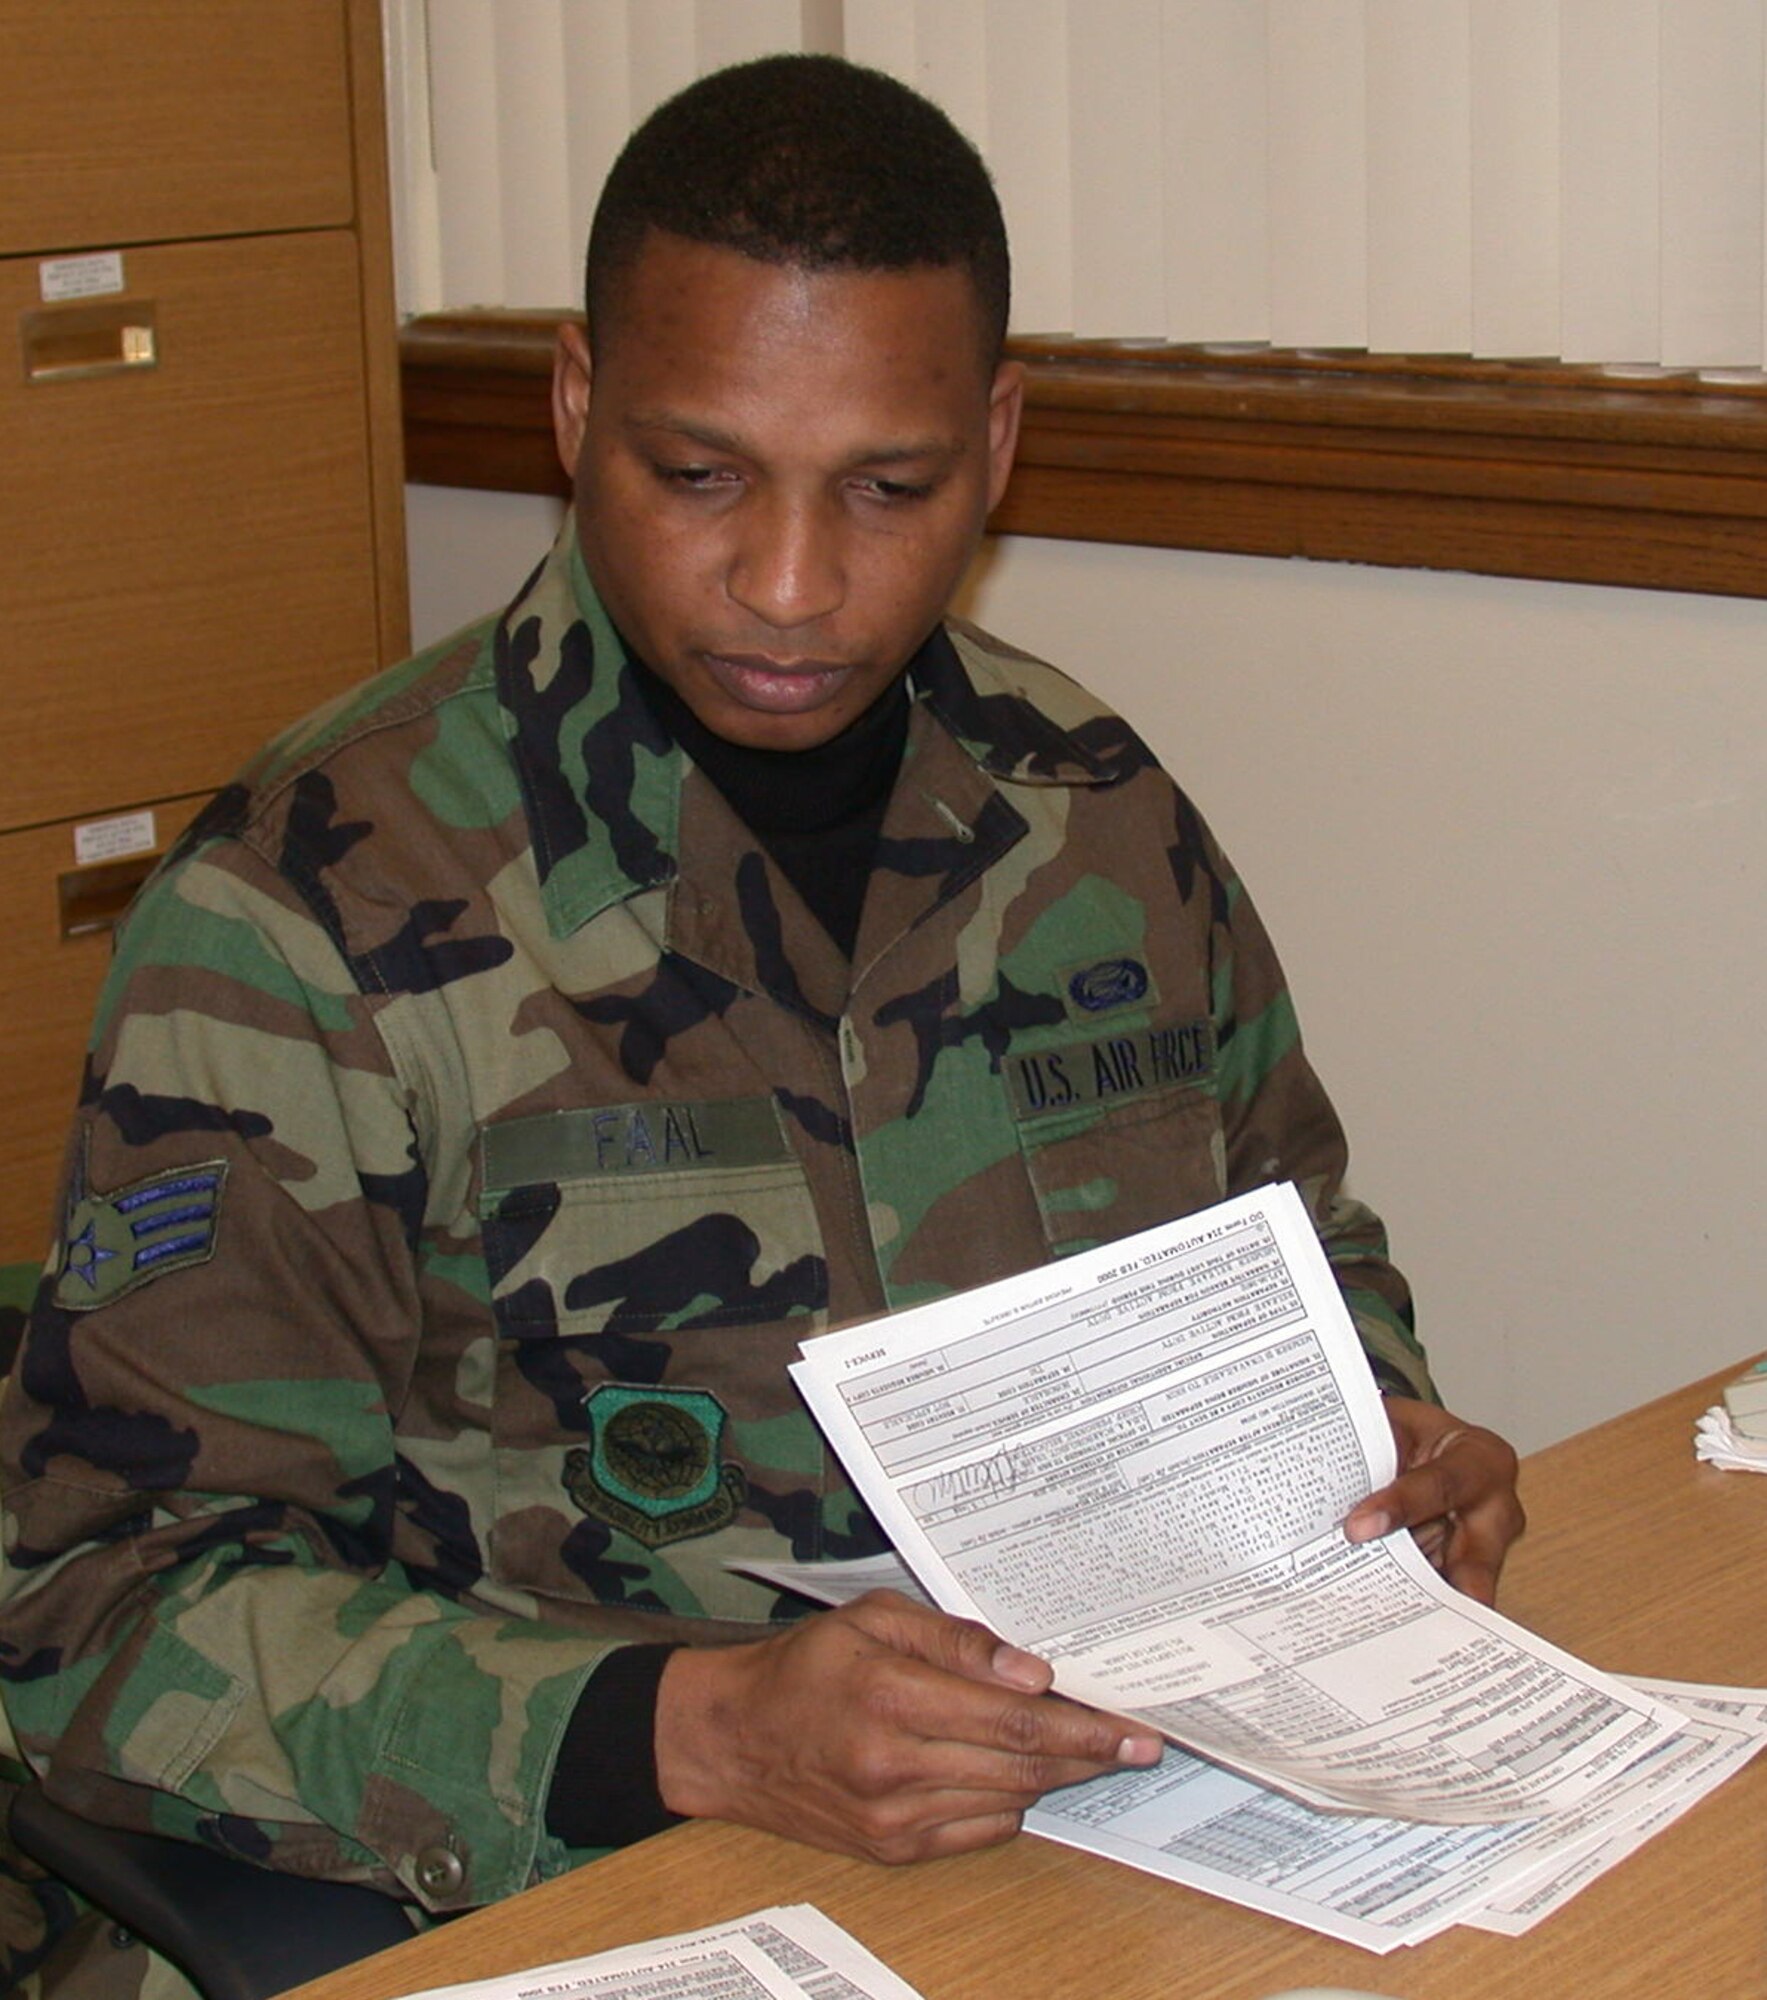 Senior Airman Papa Faal, a 459th Military Personnel Flight relocations specialist, became a U.S. citizen on December 6, 2005.  He is originally from The Gambia, a small West African country covering an area of no more than 4,400 square miles. (Air Force Photo by Capt. Nikki Credic)